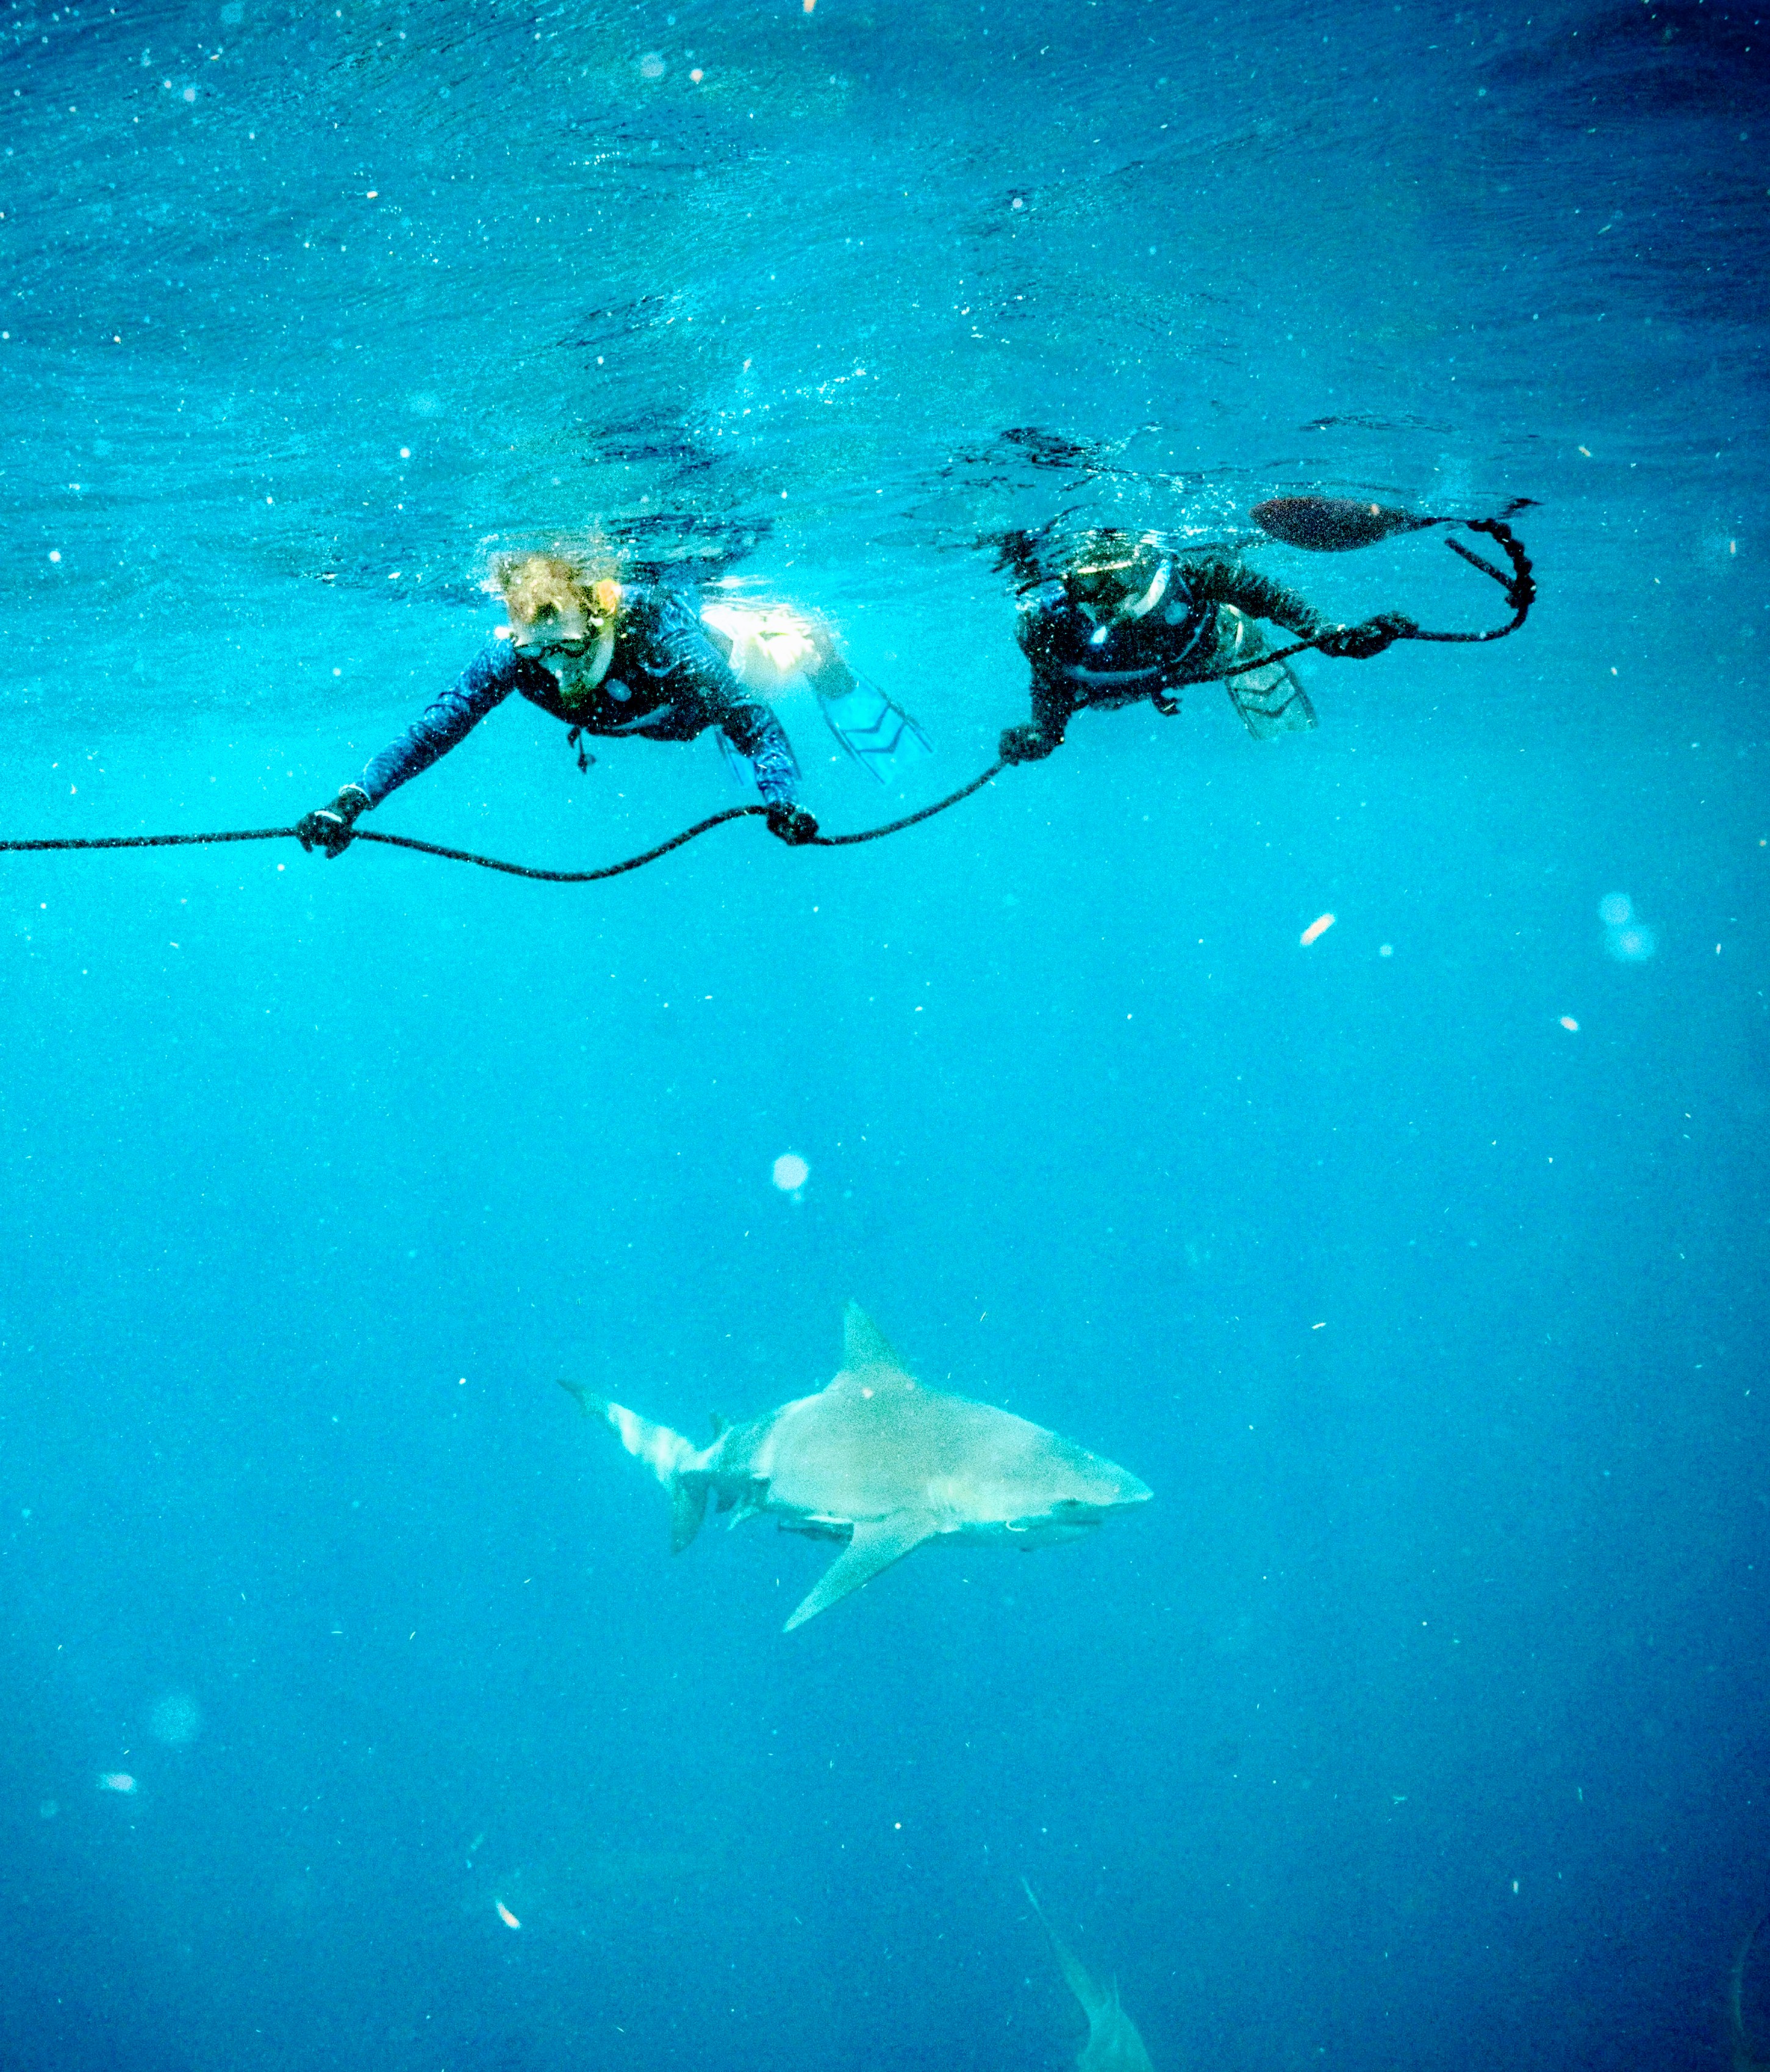 Free diving with sharks in fl. May 2023...